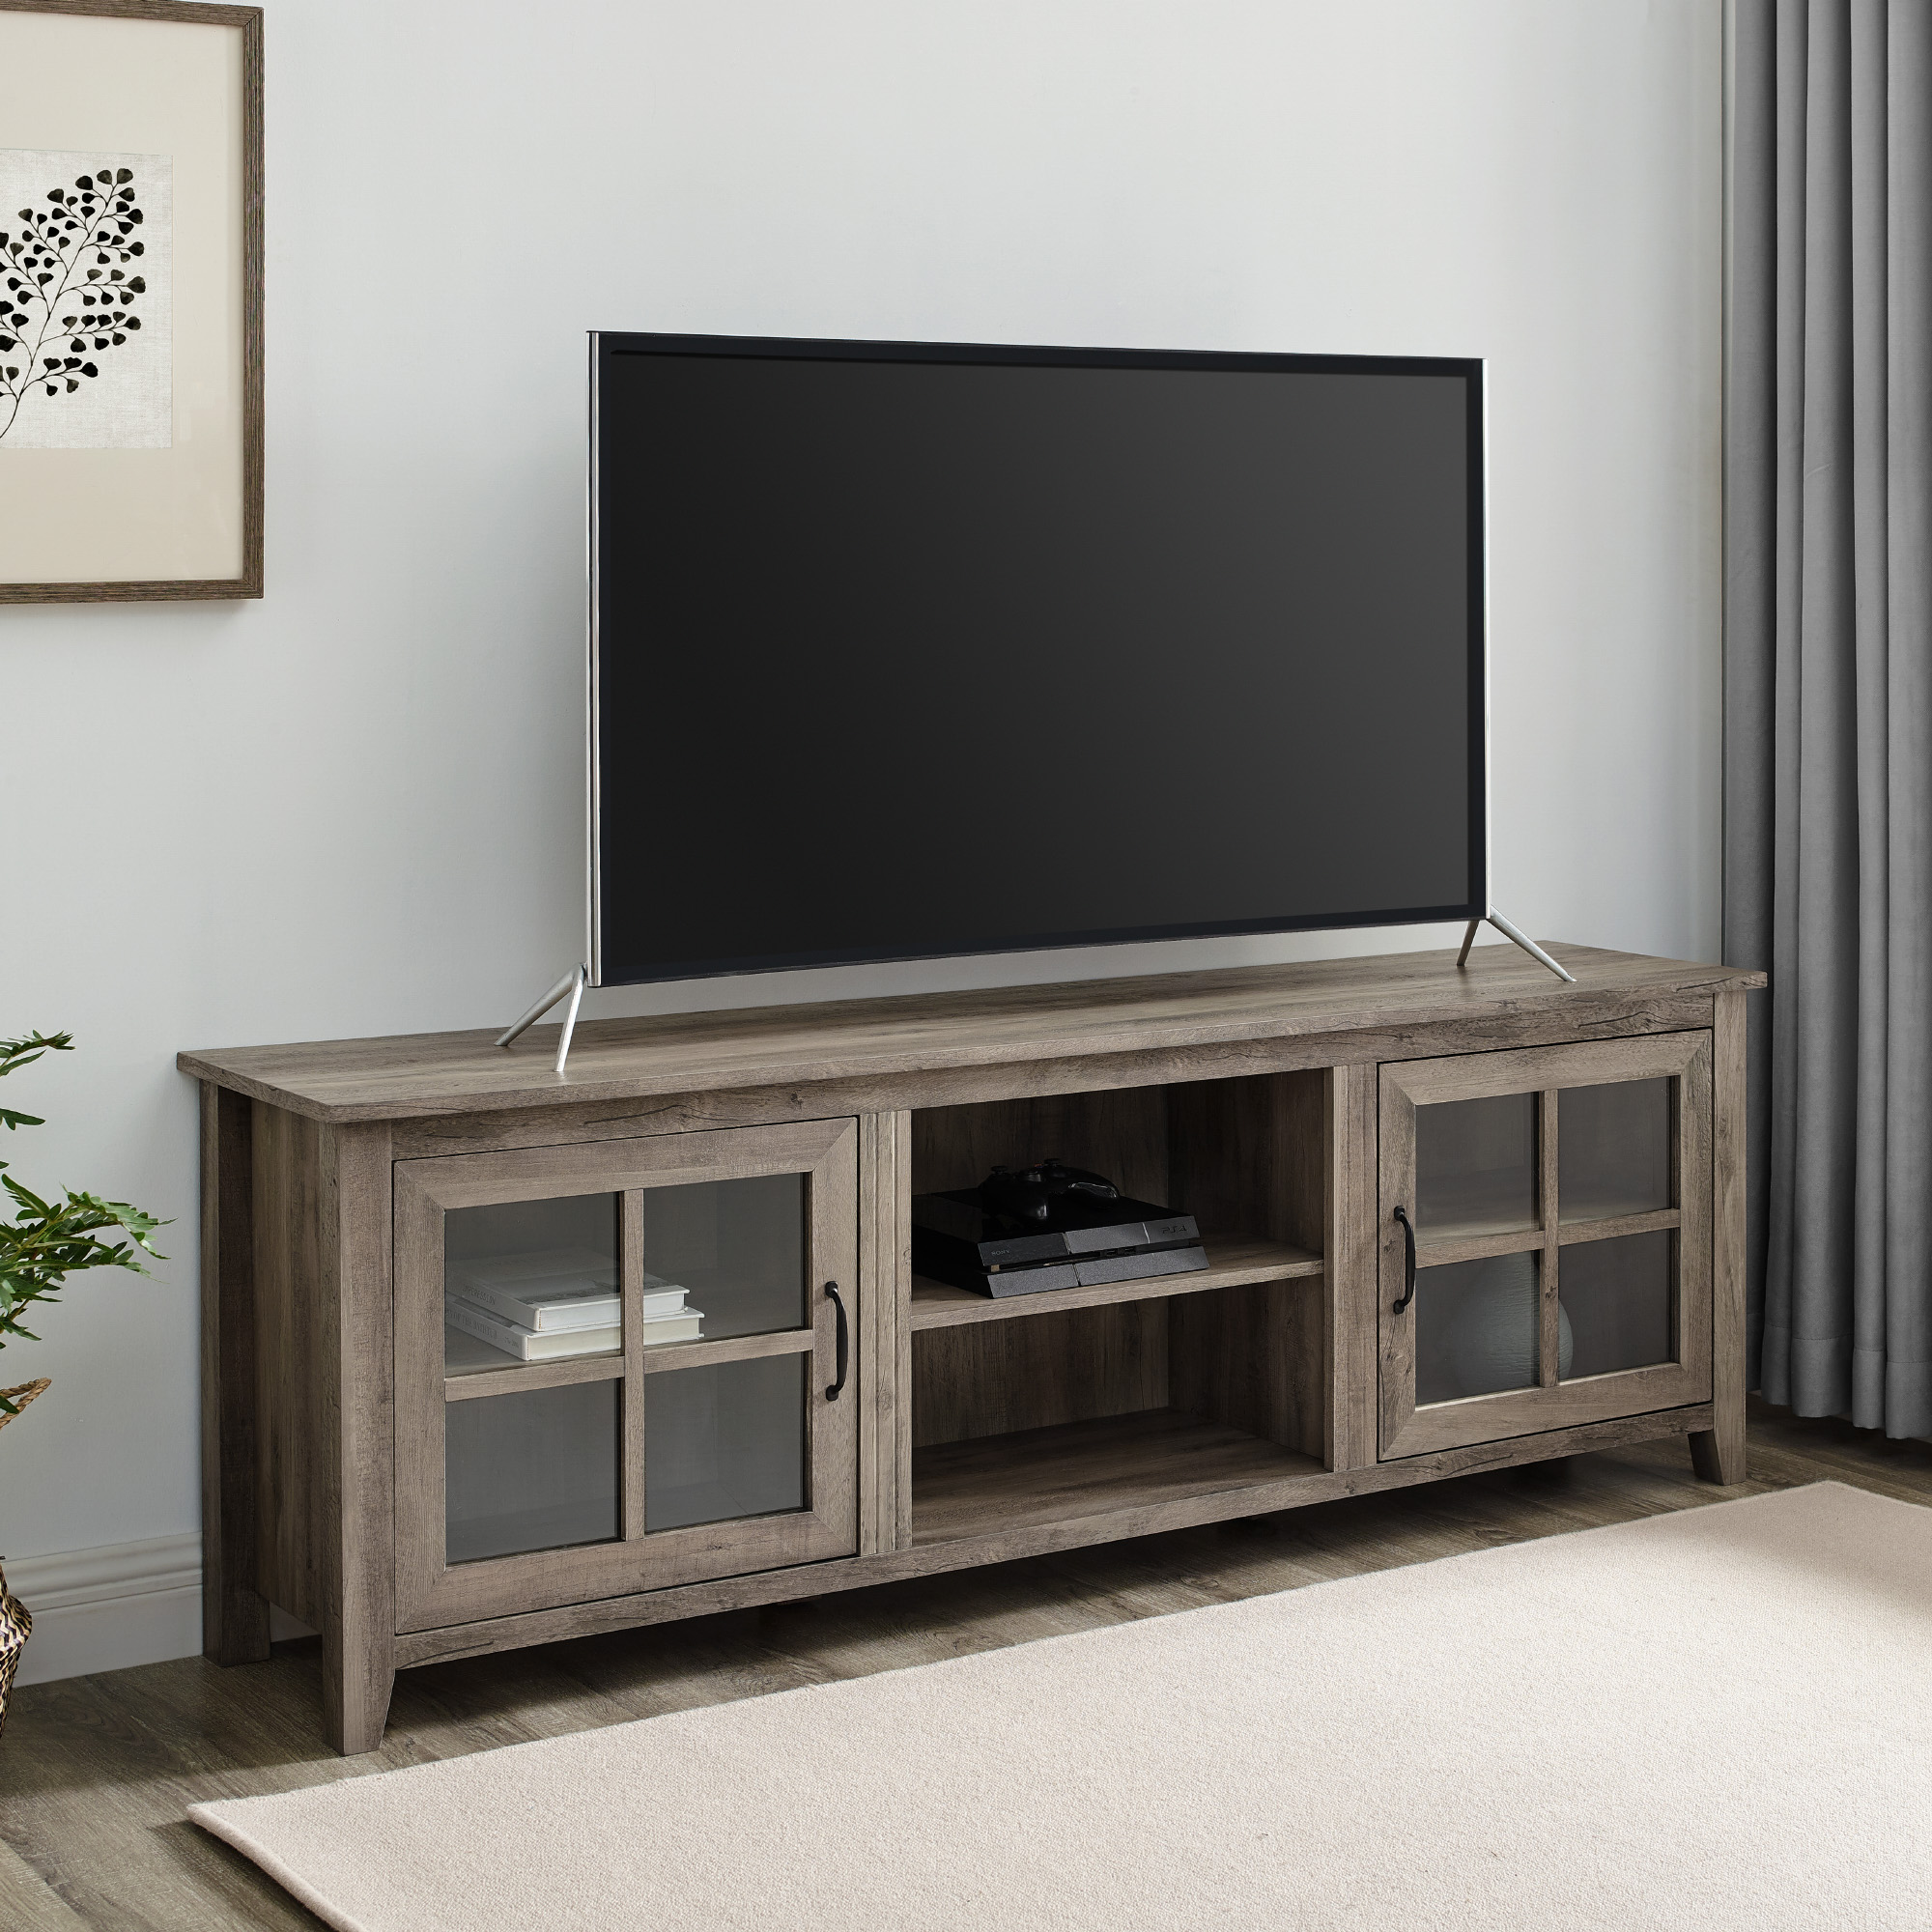 Walker Edison Modern Farmhouse TV Stand for TVs up to 80", Grey Wash - image 1 of 14